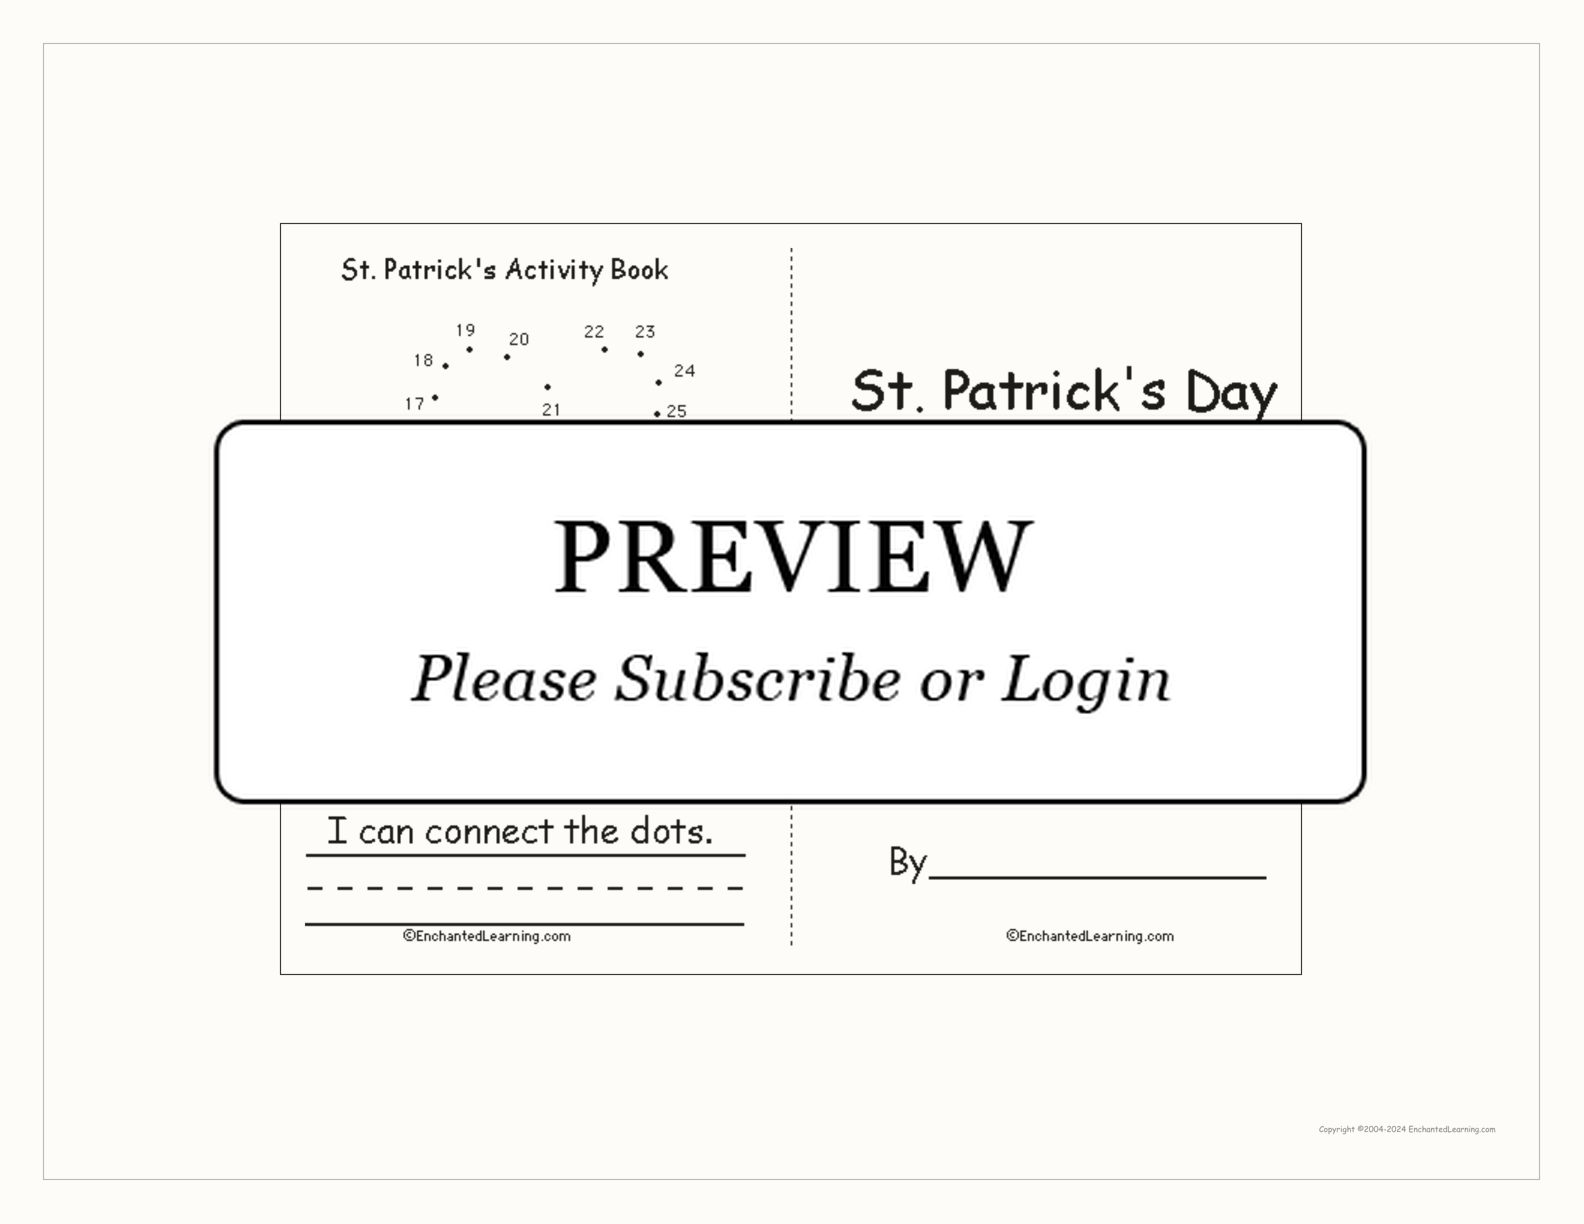 St. Patrick's Day Activity Book interactive worksheet page 1